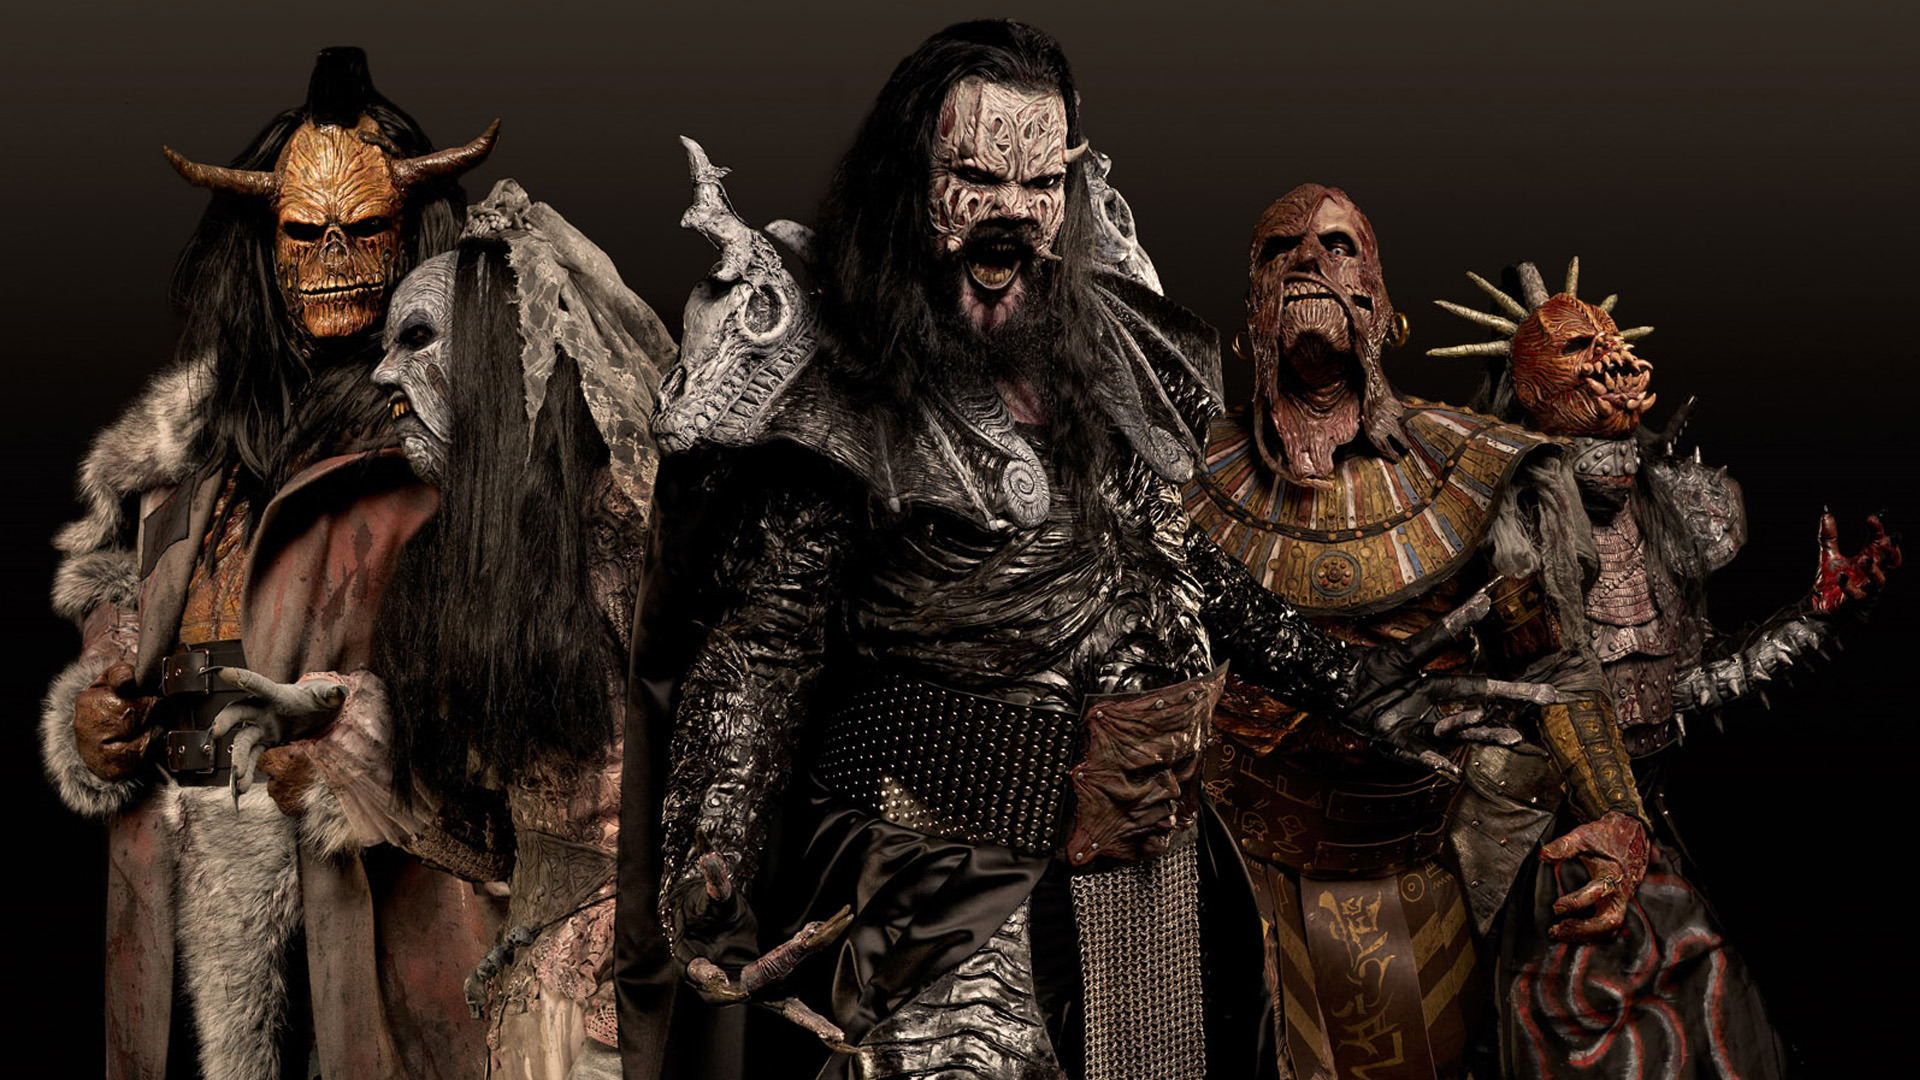 Who's Your Daddy? av Lordi